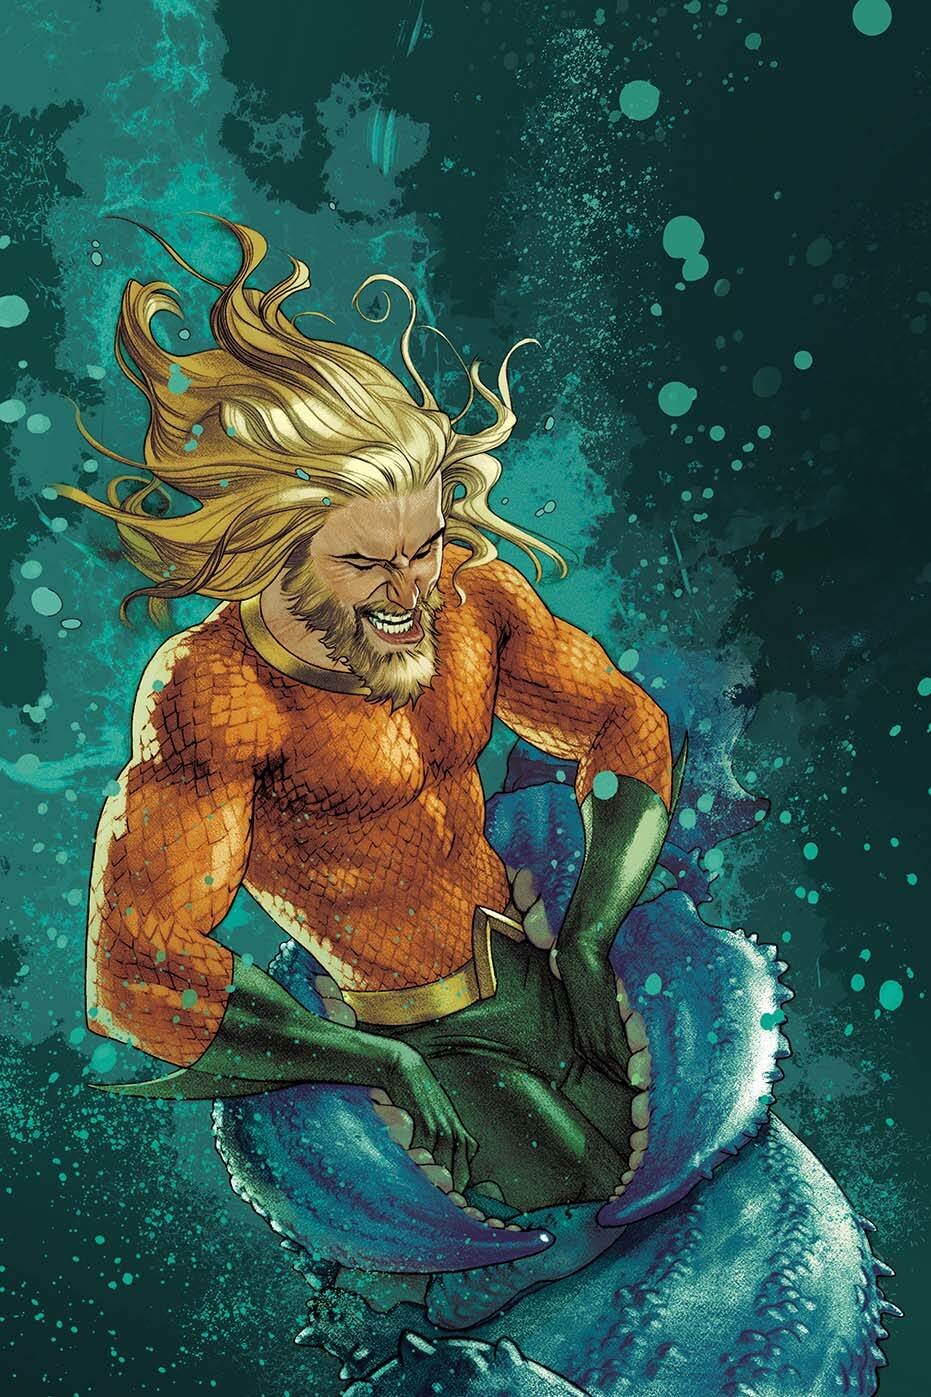 Aquaman Textless Poster 2018 Wallpapers